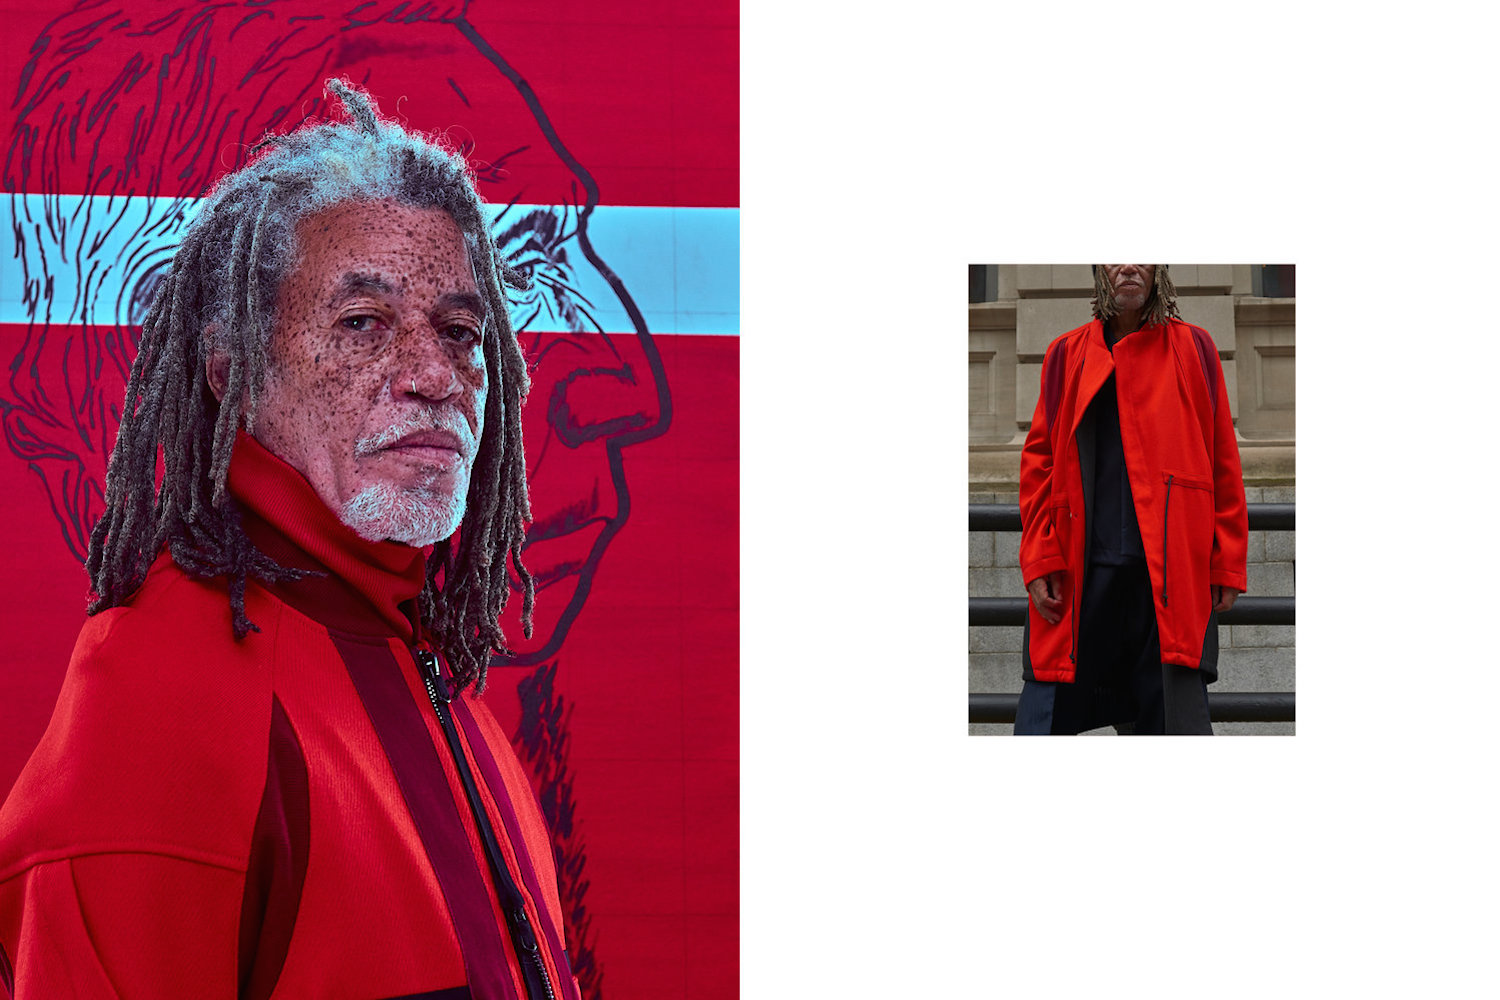 abasi rosborough fw18 campaign no one colors anymore